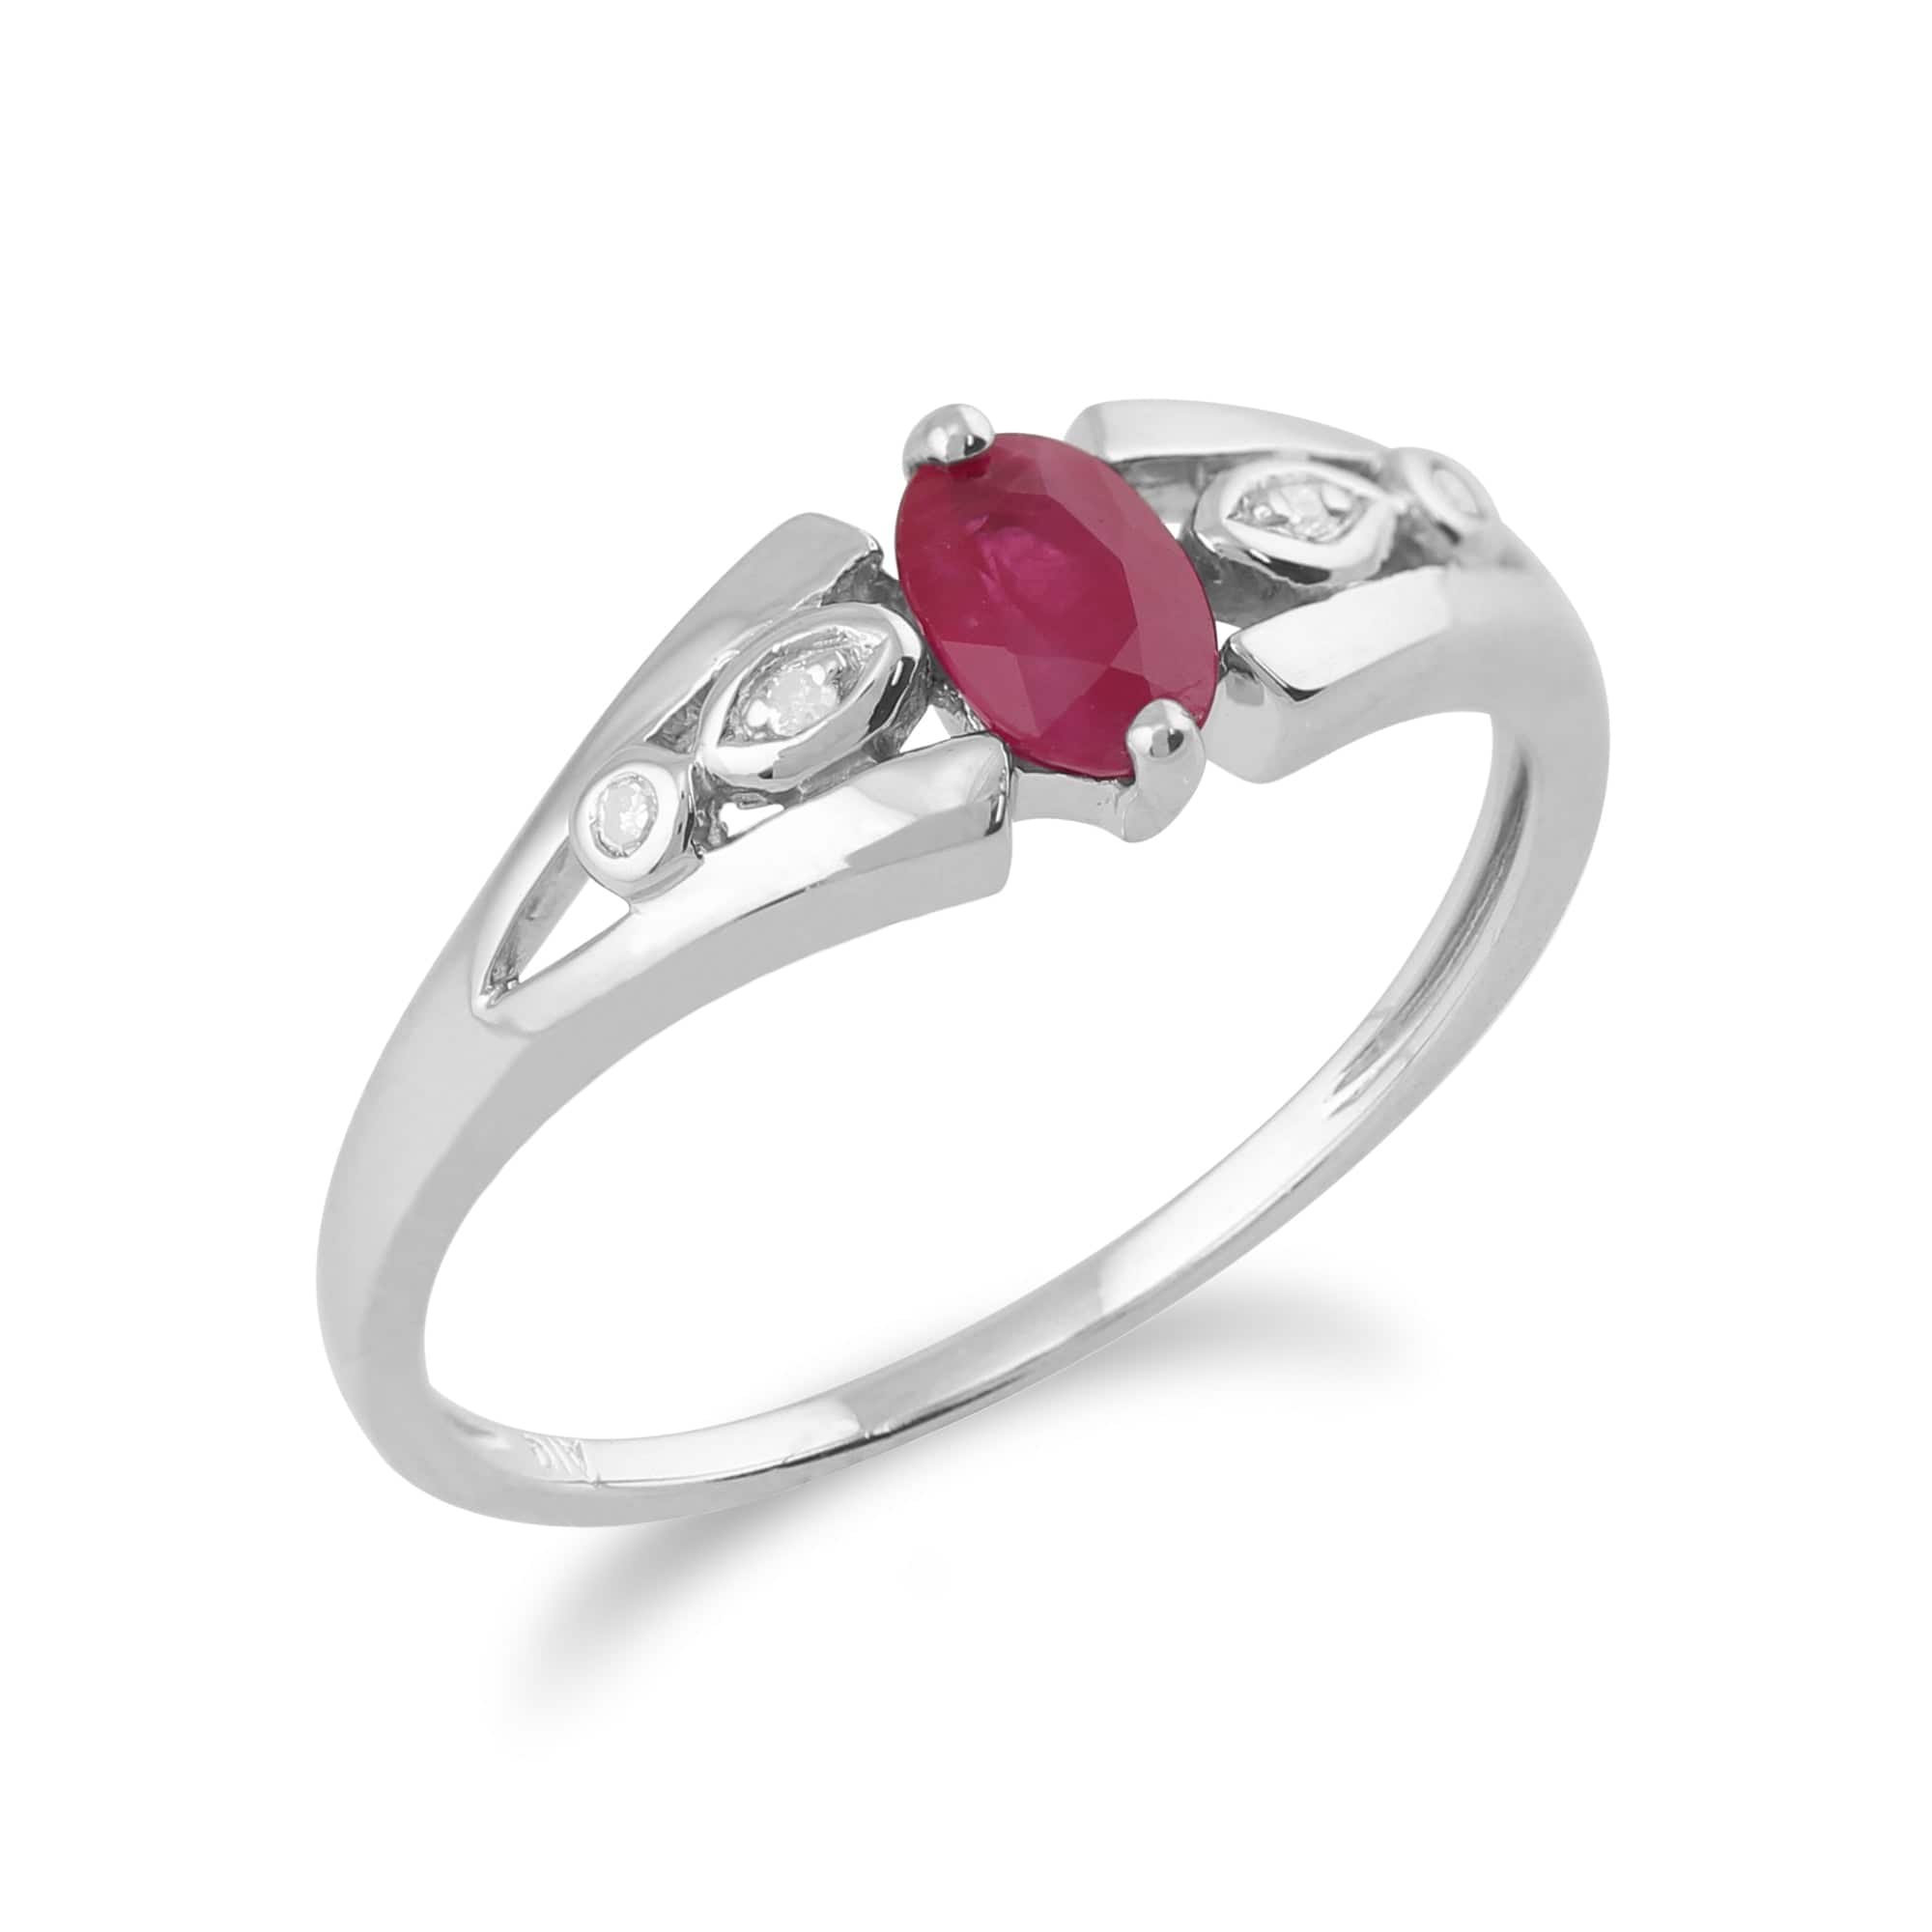 22608 Classic Oval Ruby & Diamond Ring in 9ct White Gold 2